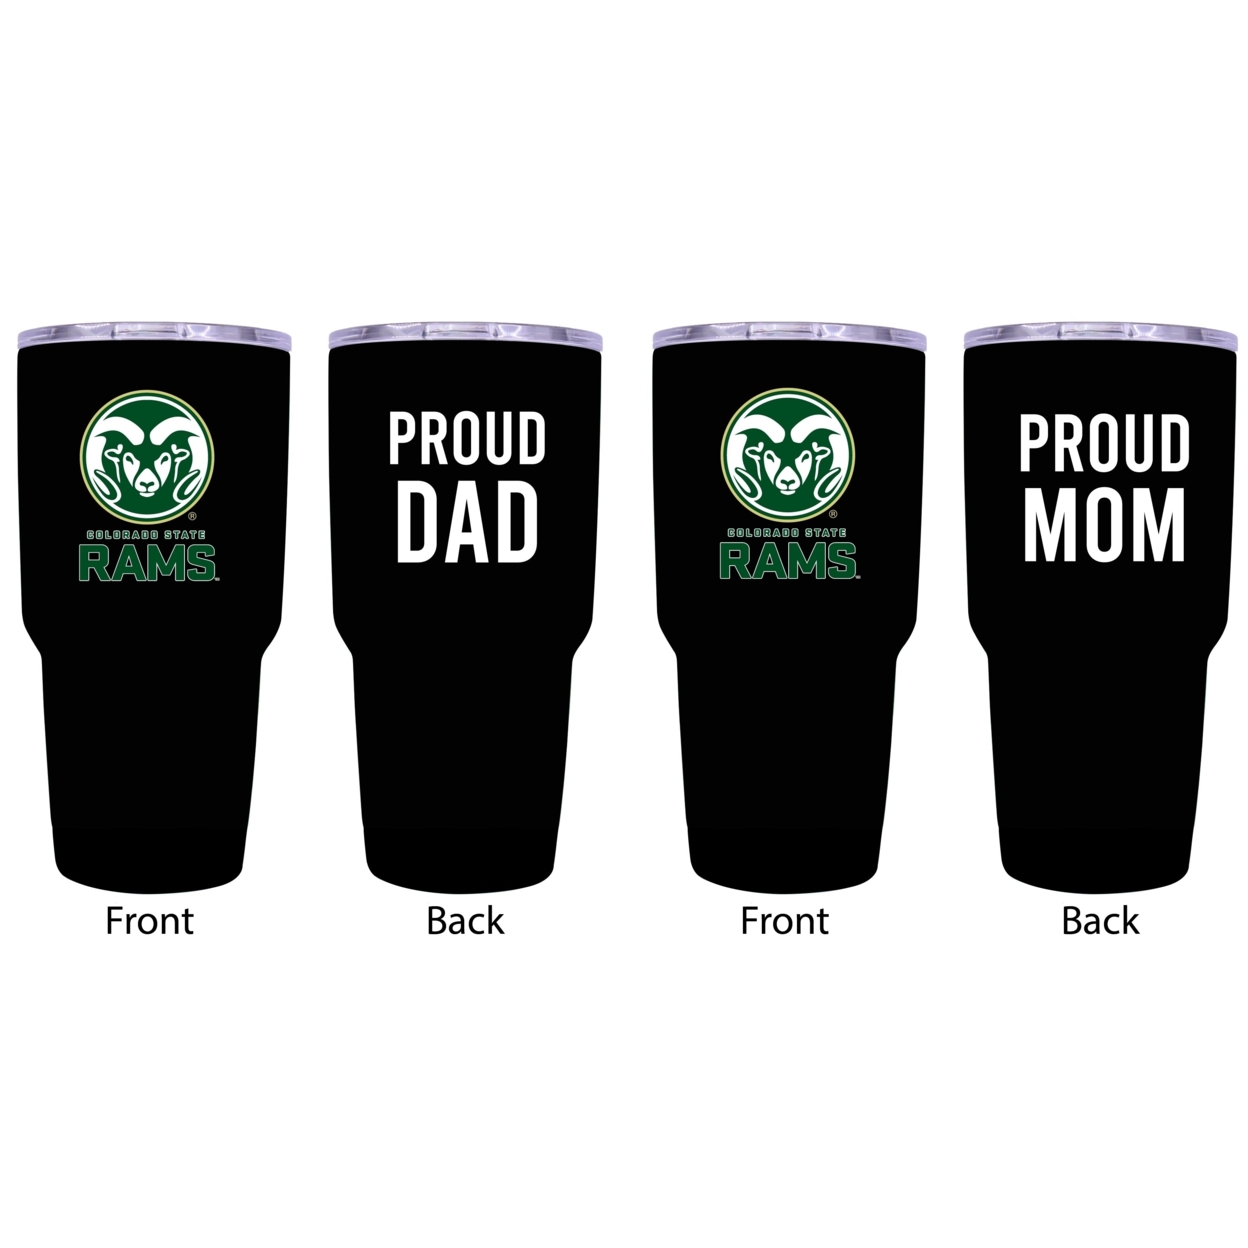 Colorado State Rams Proud Mom And Dad 24 Oz Insulated Stainless Steel Tumblers 2 Pack Black.